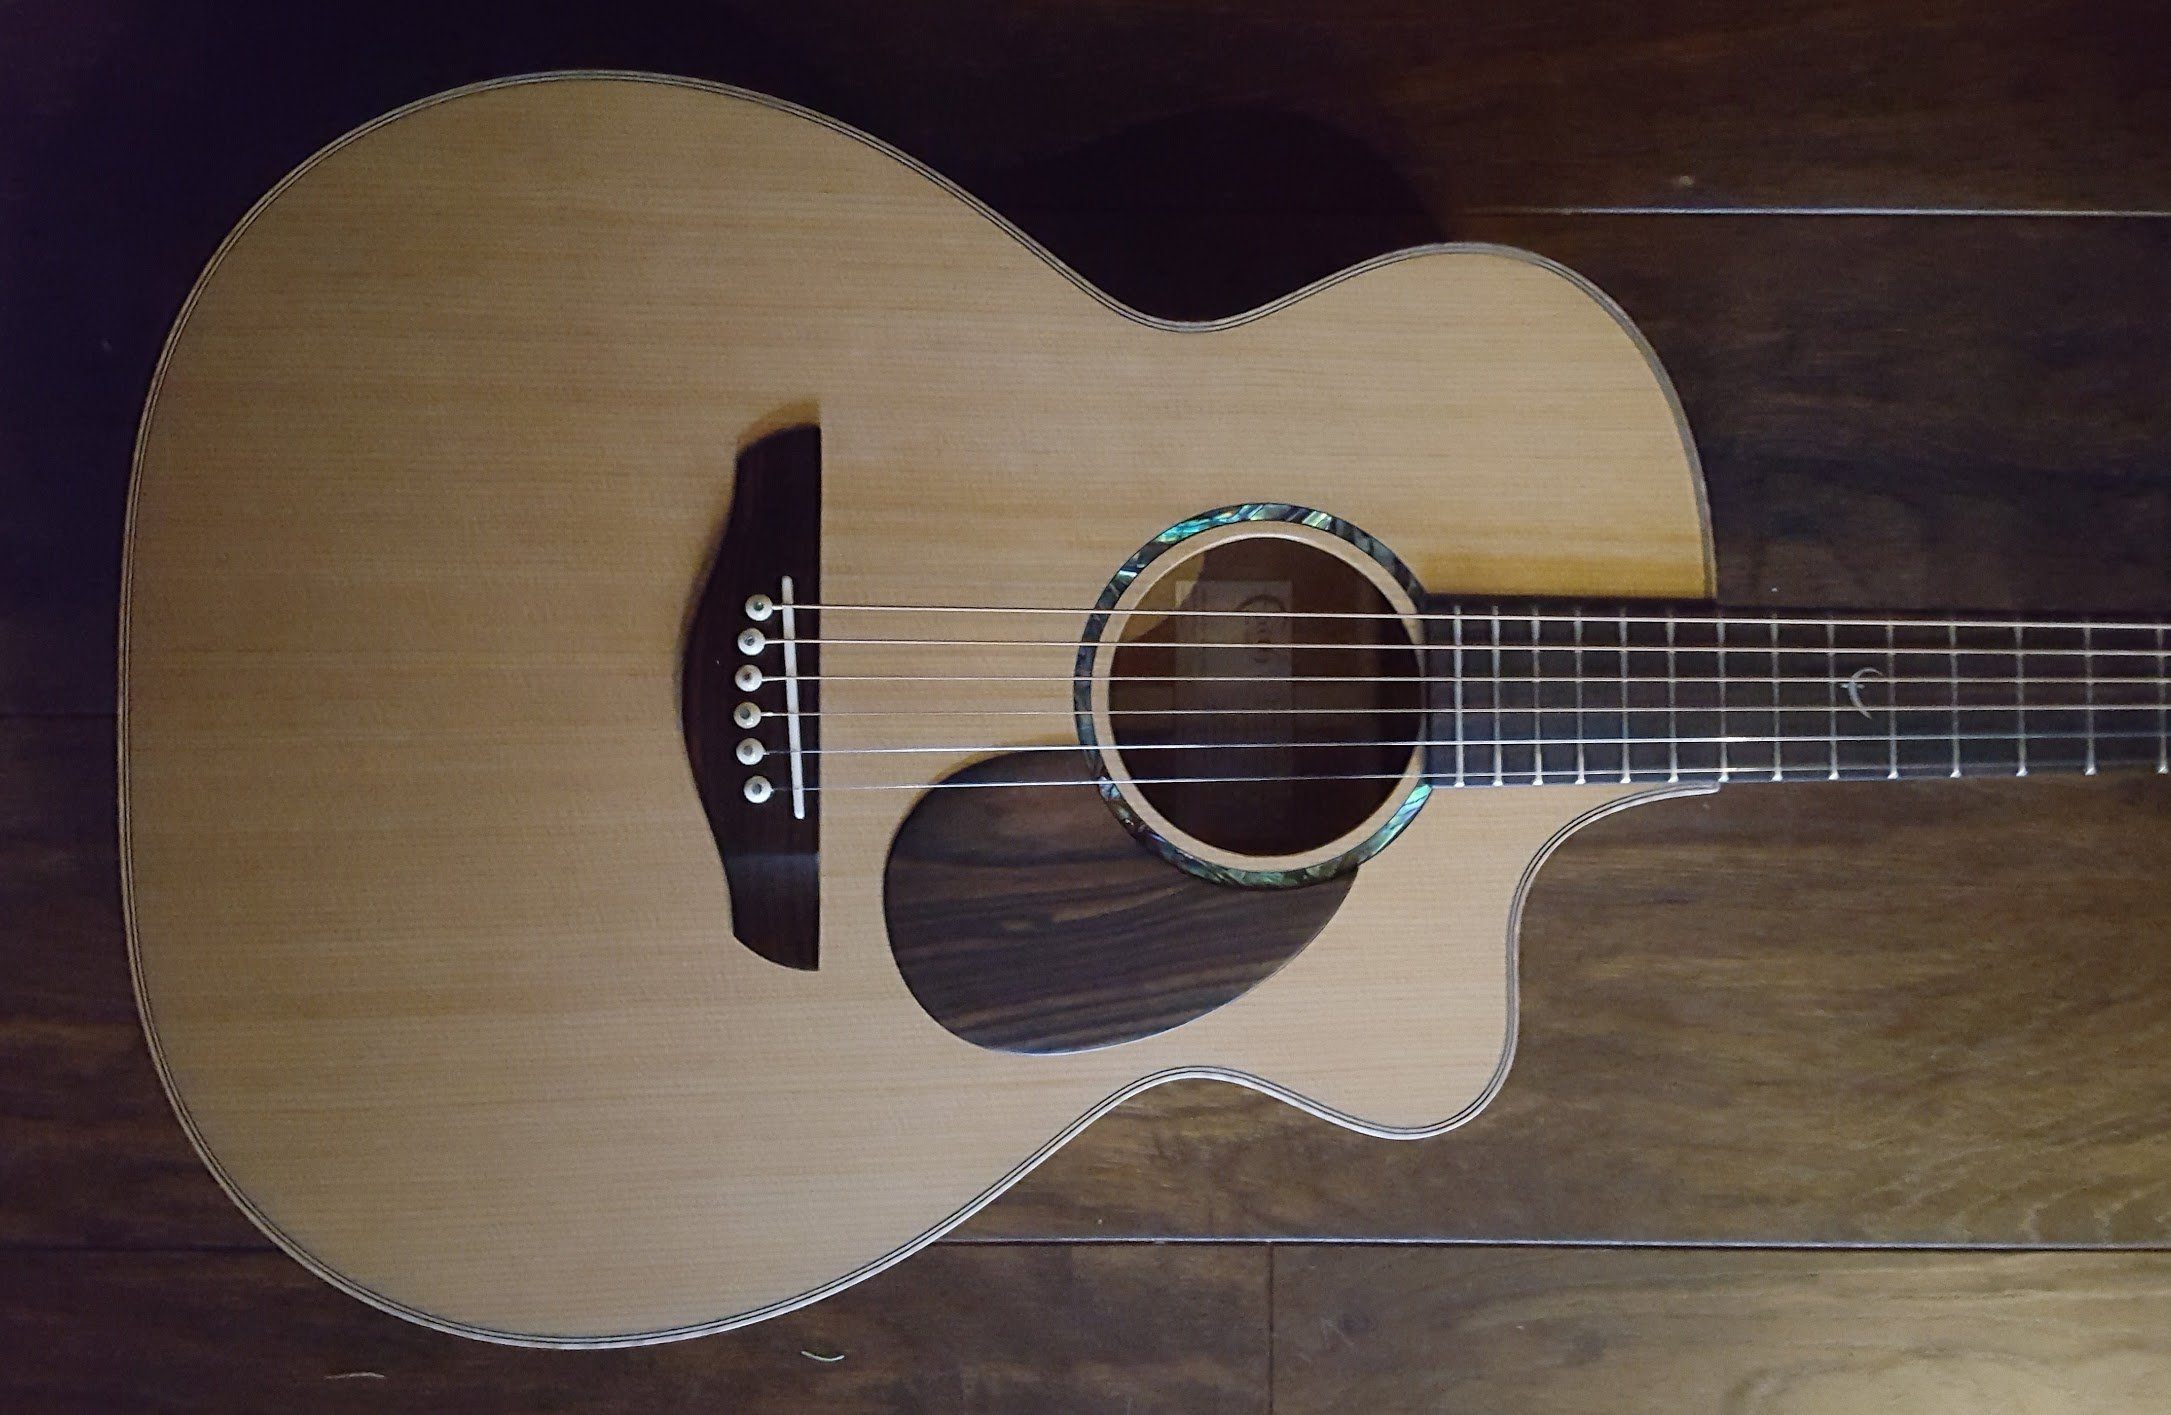 Faith FG1HCE - PJE Legacy Earth Cut/Electro [Used], Electro Acoustic Guitar for sale at Richards Guitars.